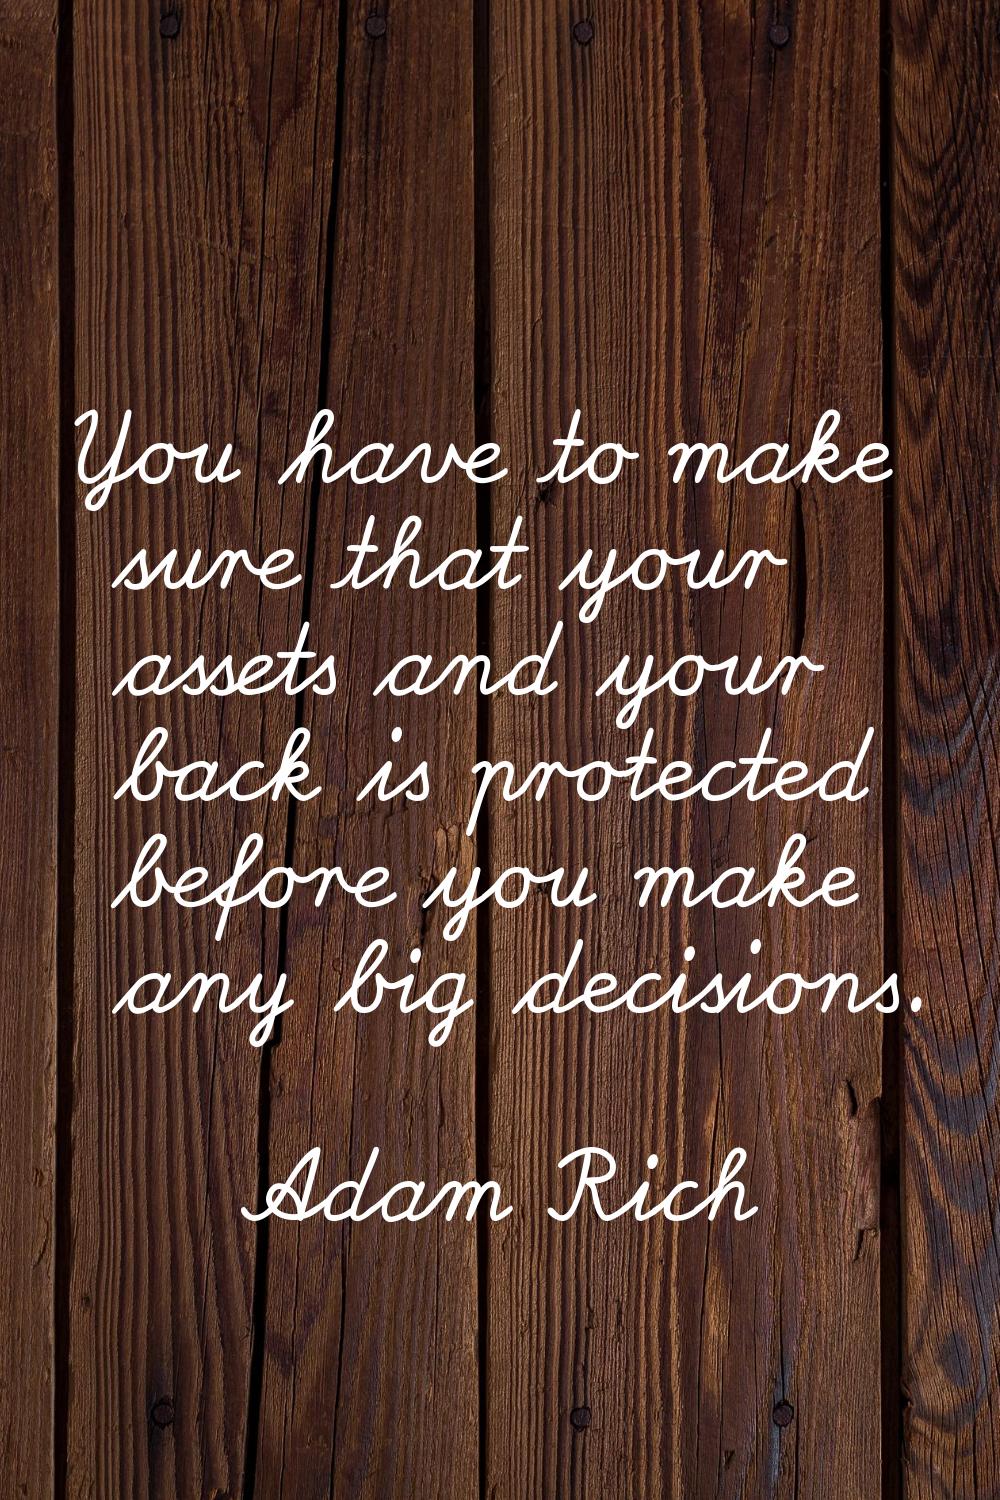 You have to make sure that your assets and your back is protected before you make any big decisions